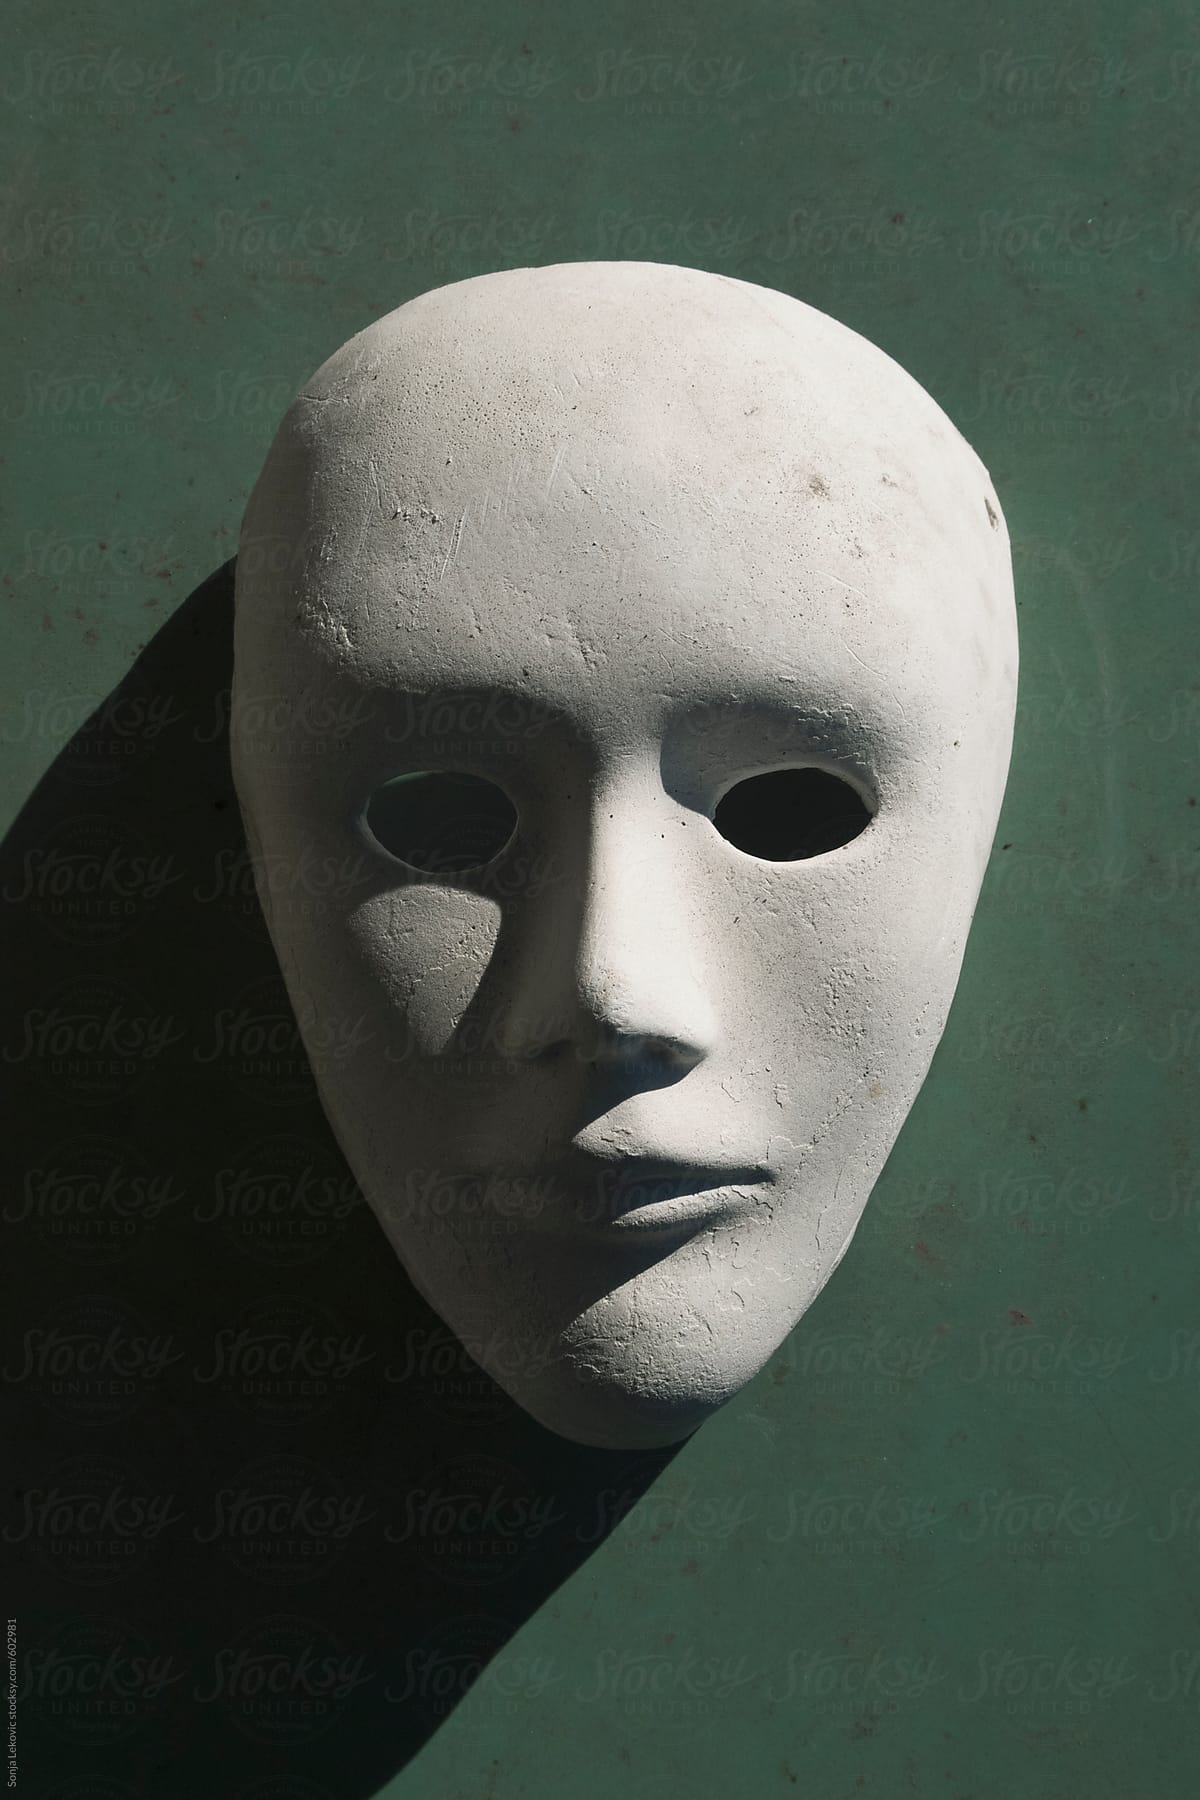 white human face mask with a shadow on a green background